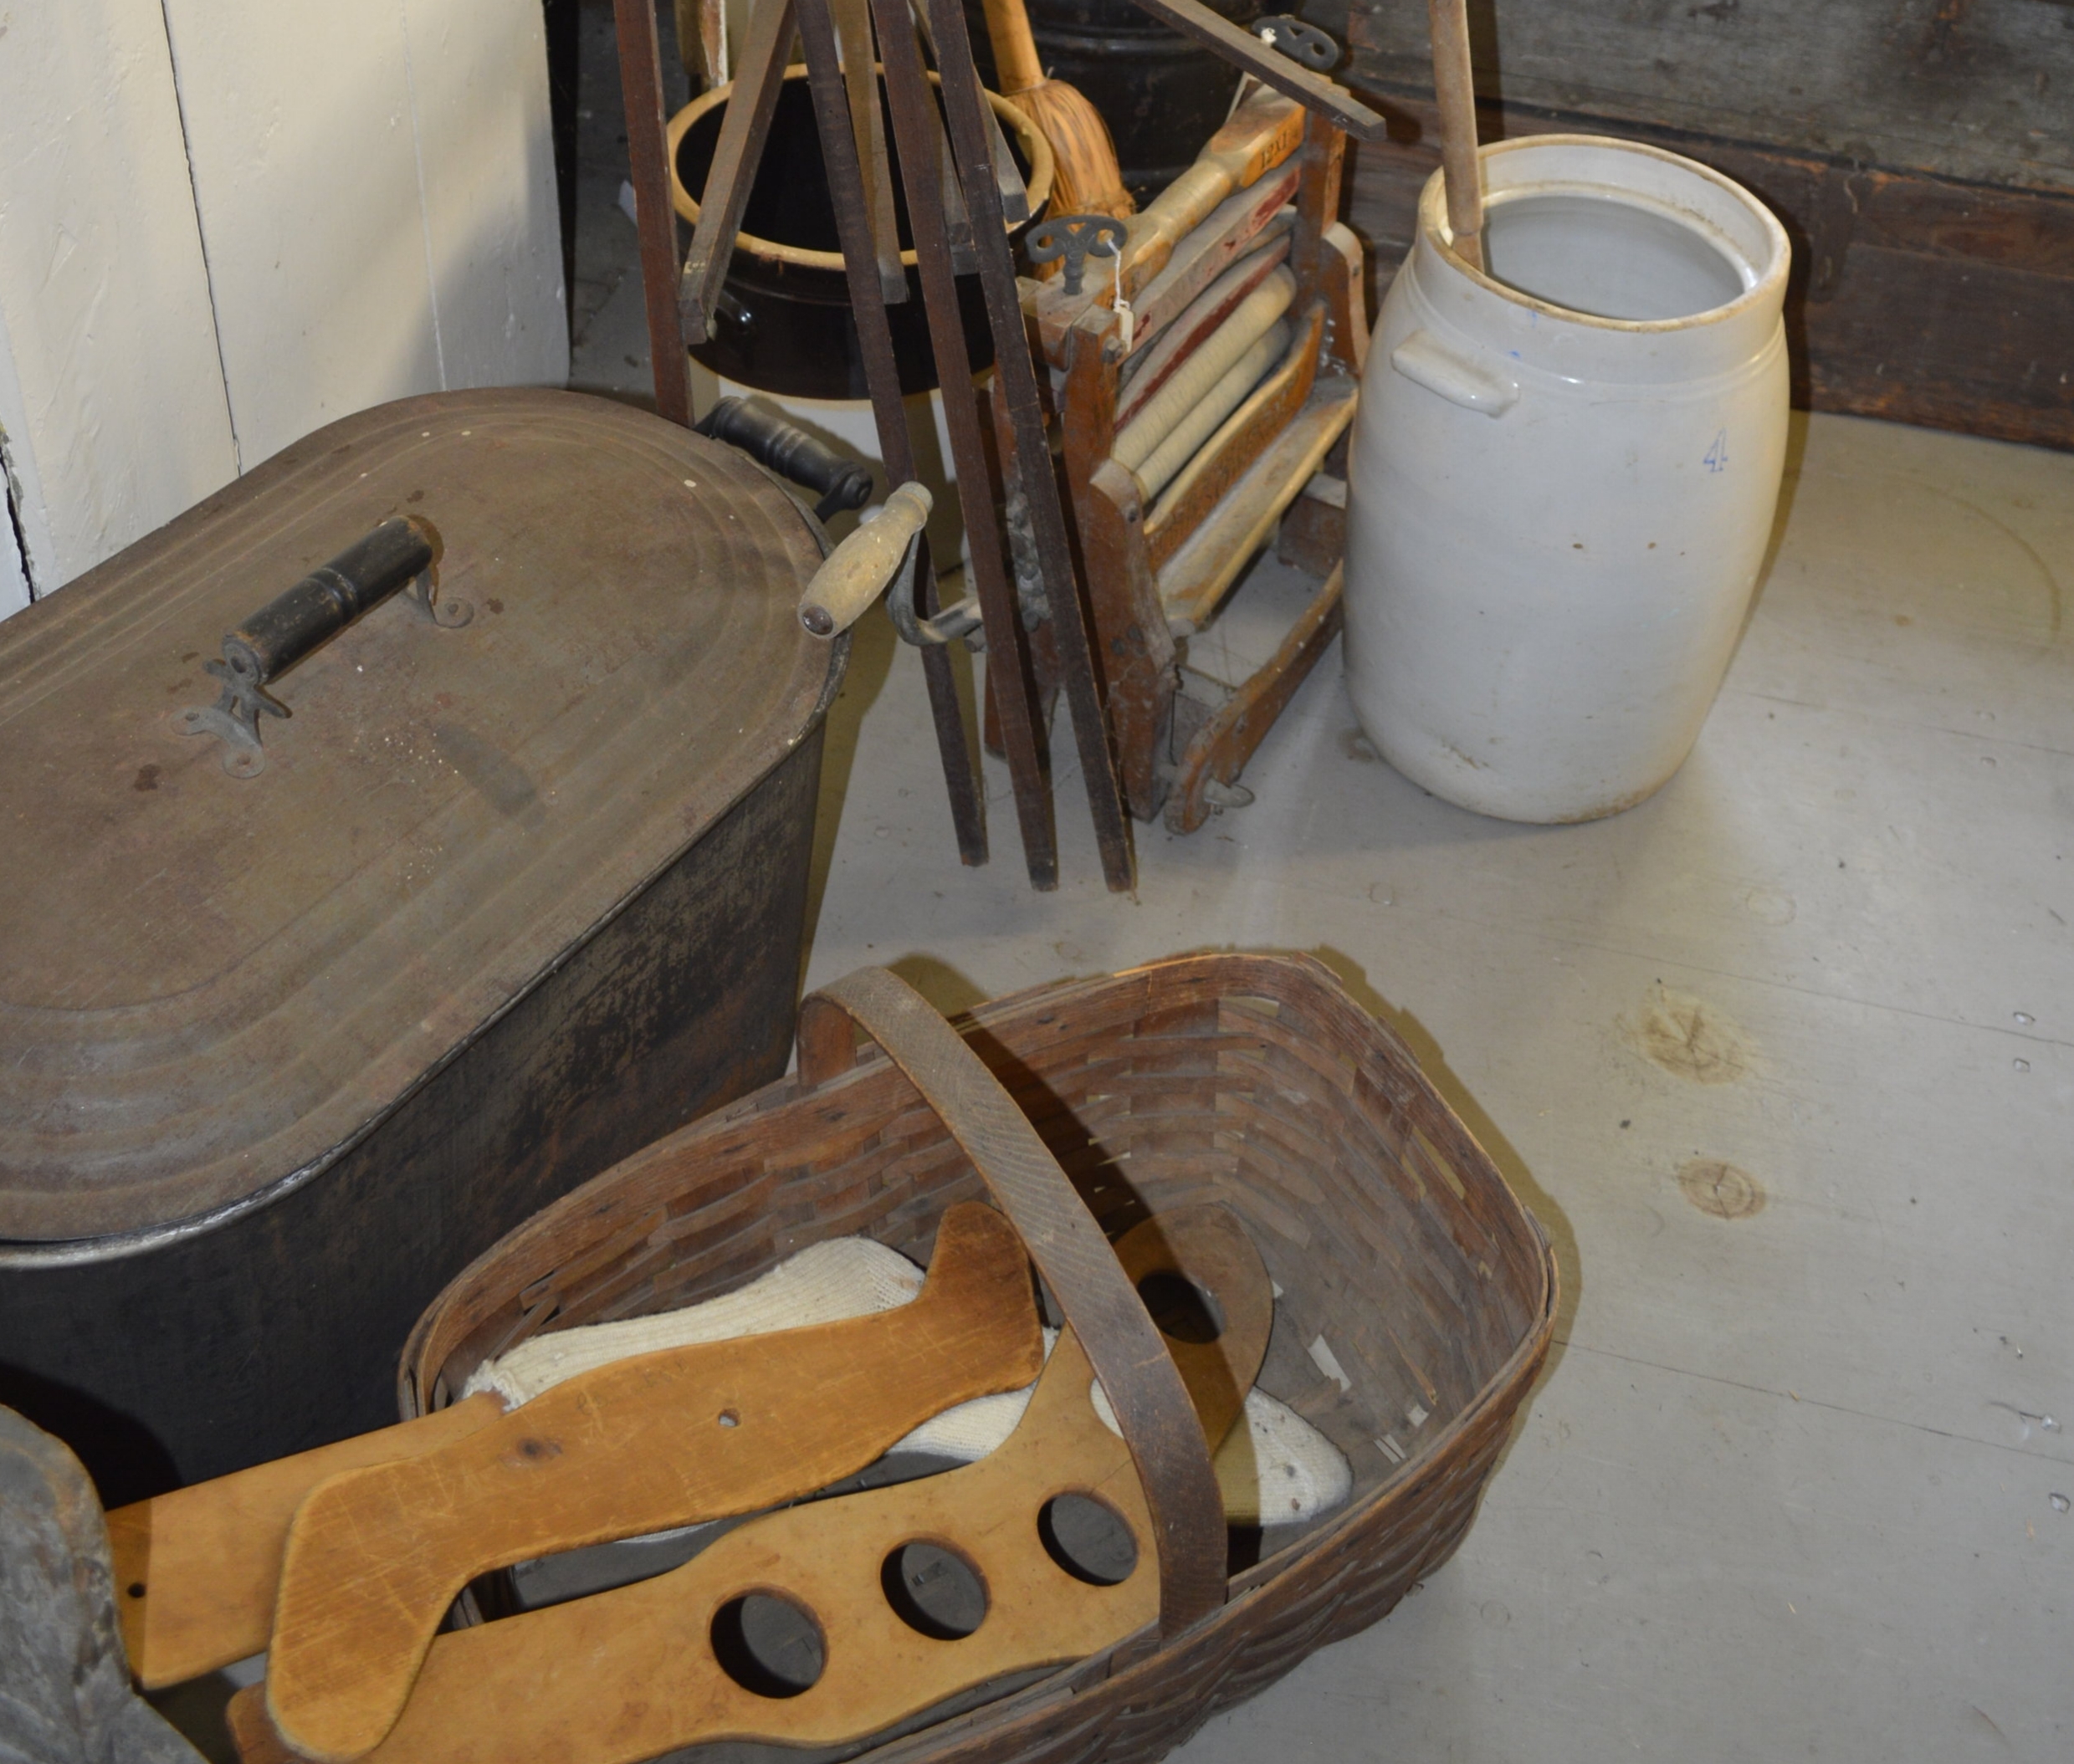 The wooden objects in the basket are sock stretchers. They prevented the wool from shrinking. (Copy)